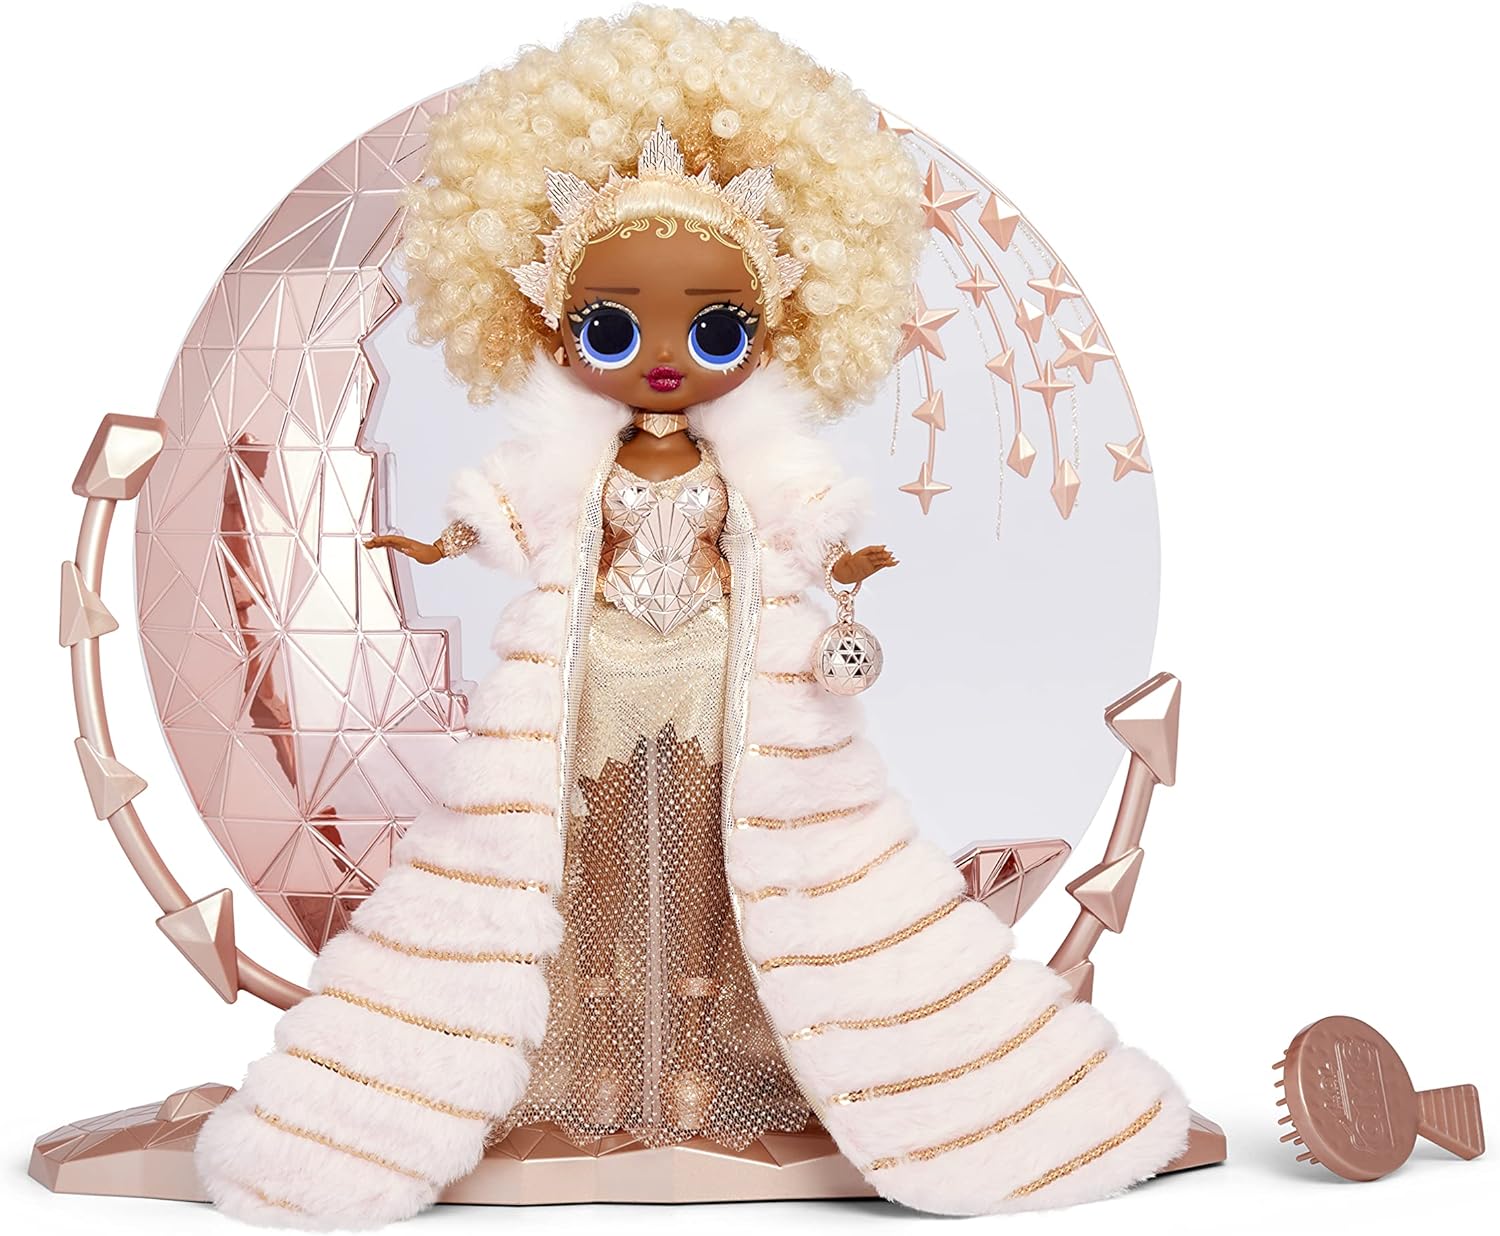 L.O.L. Surprise! Holiday OMG 2021 Collector NYE Queen Fashion Doll (Limited Edition)